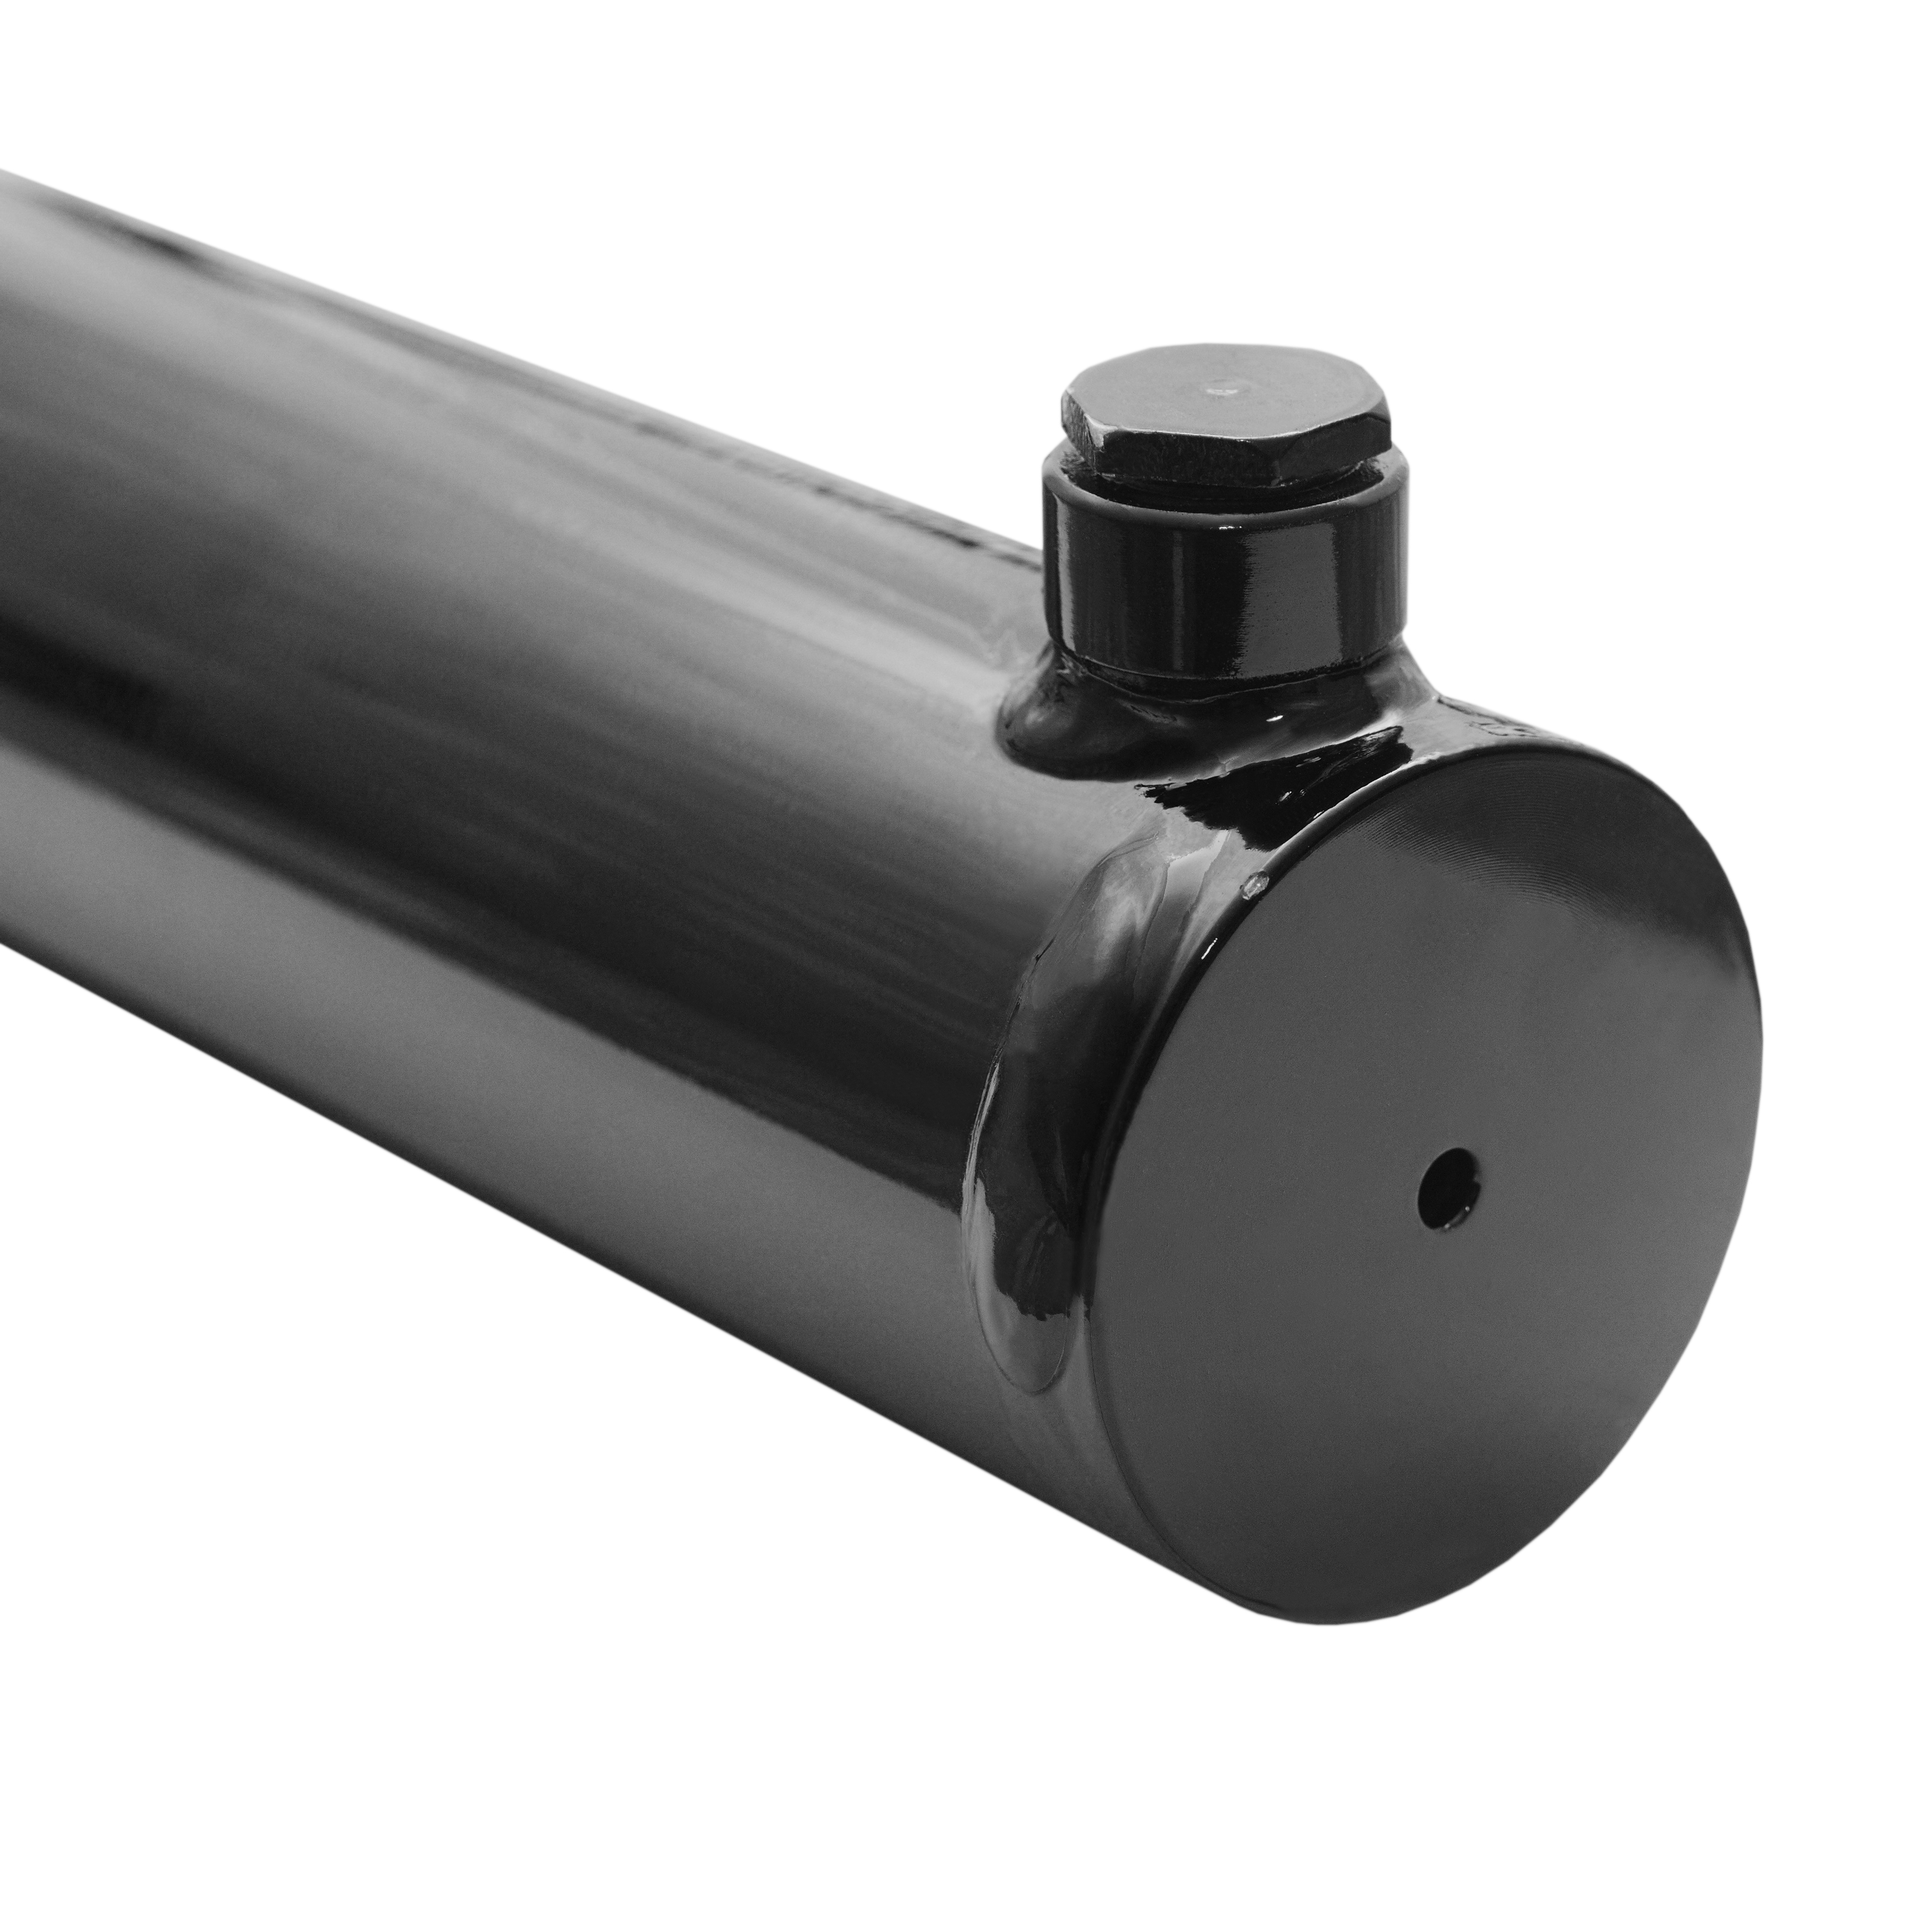 2 bore x 23 stroke hydraulic cylinder, welded universal double acting cylinder | Magister Hydraulics